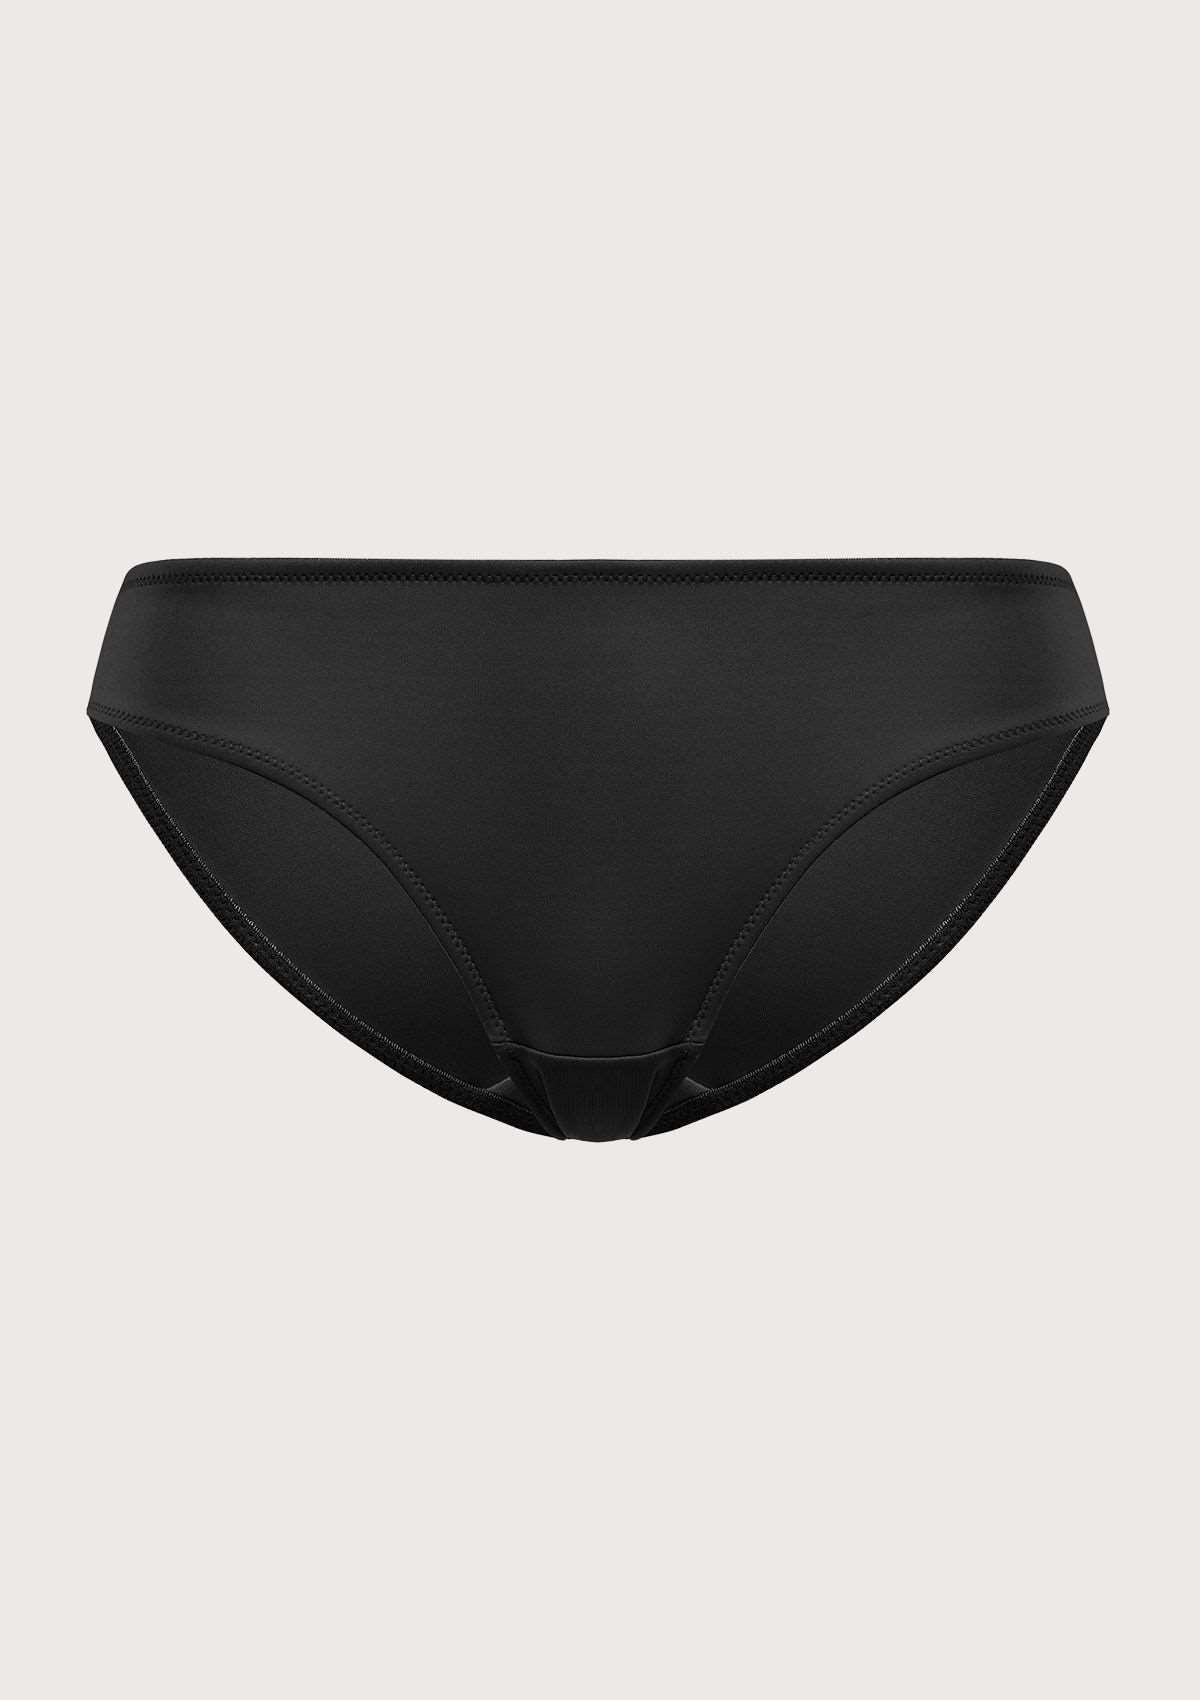 HSIA Patricia Smooth Classic Soft Stretch Panty - Everyday Comfort - L / Black